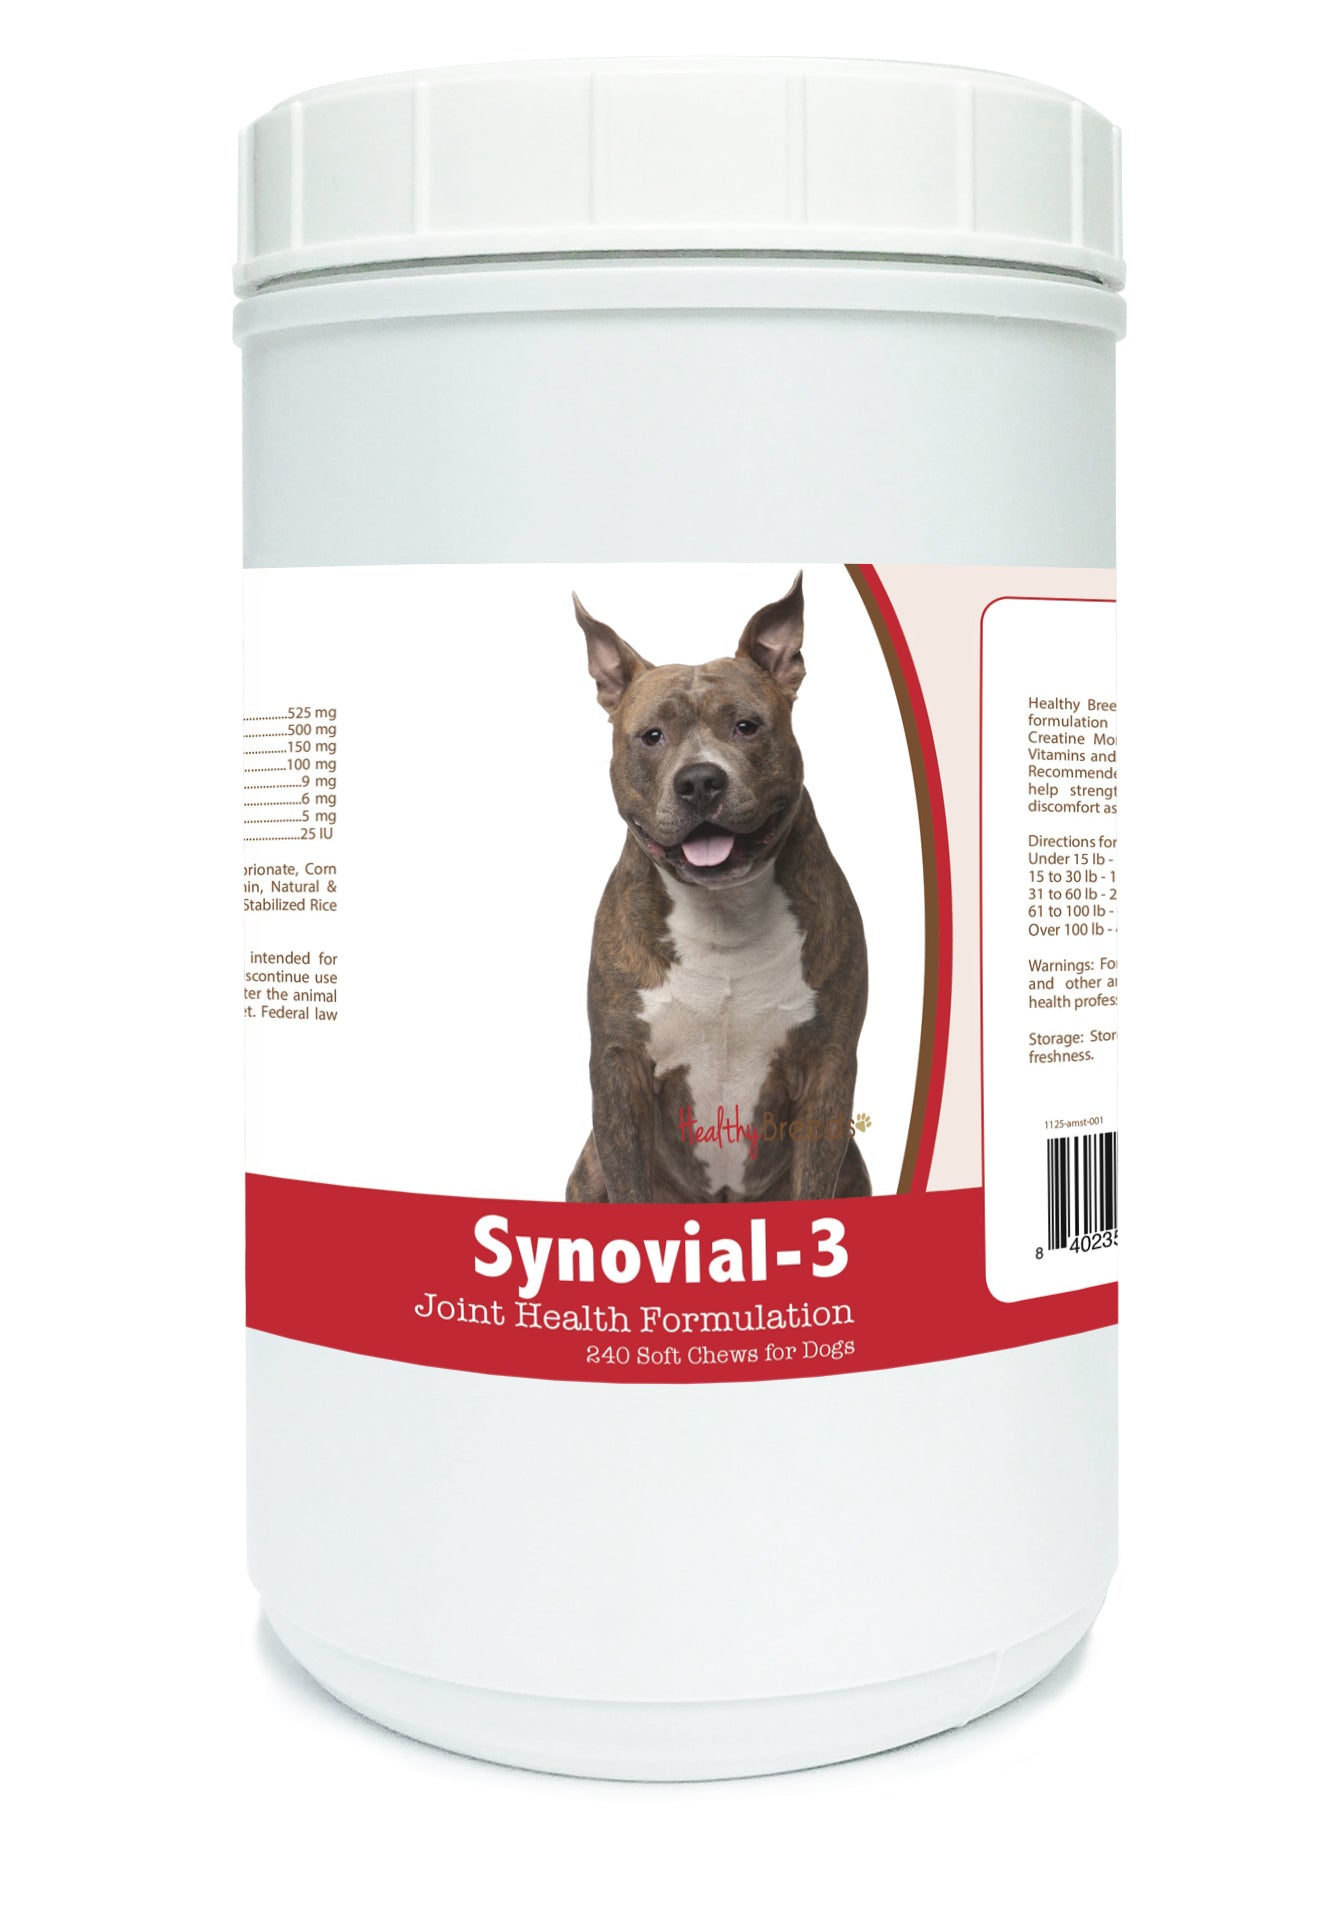 American Staffordshire Terrier Synovial-3 Joint Health Formulation Soft Chews 240 Coun